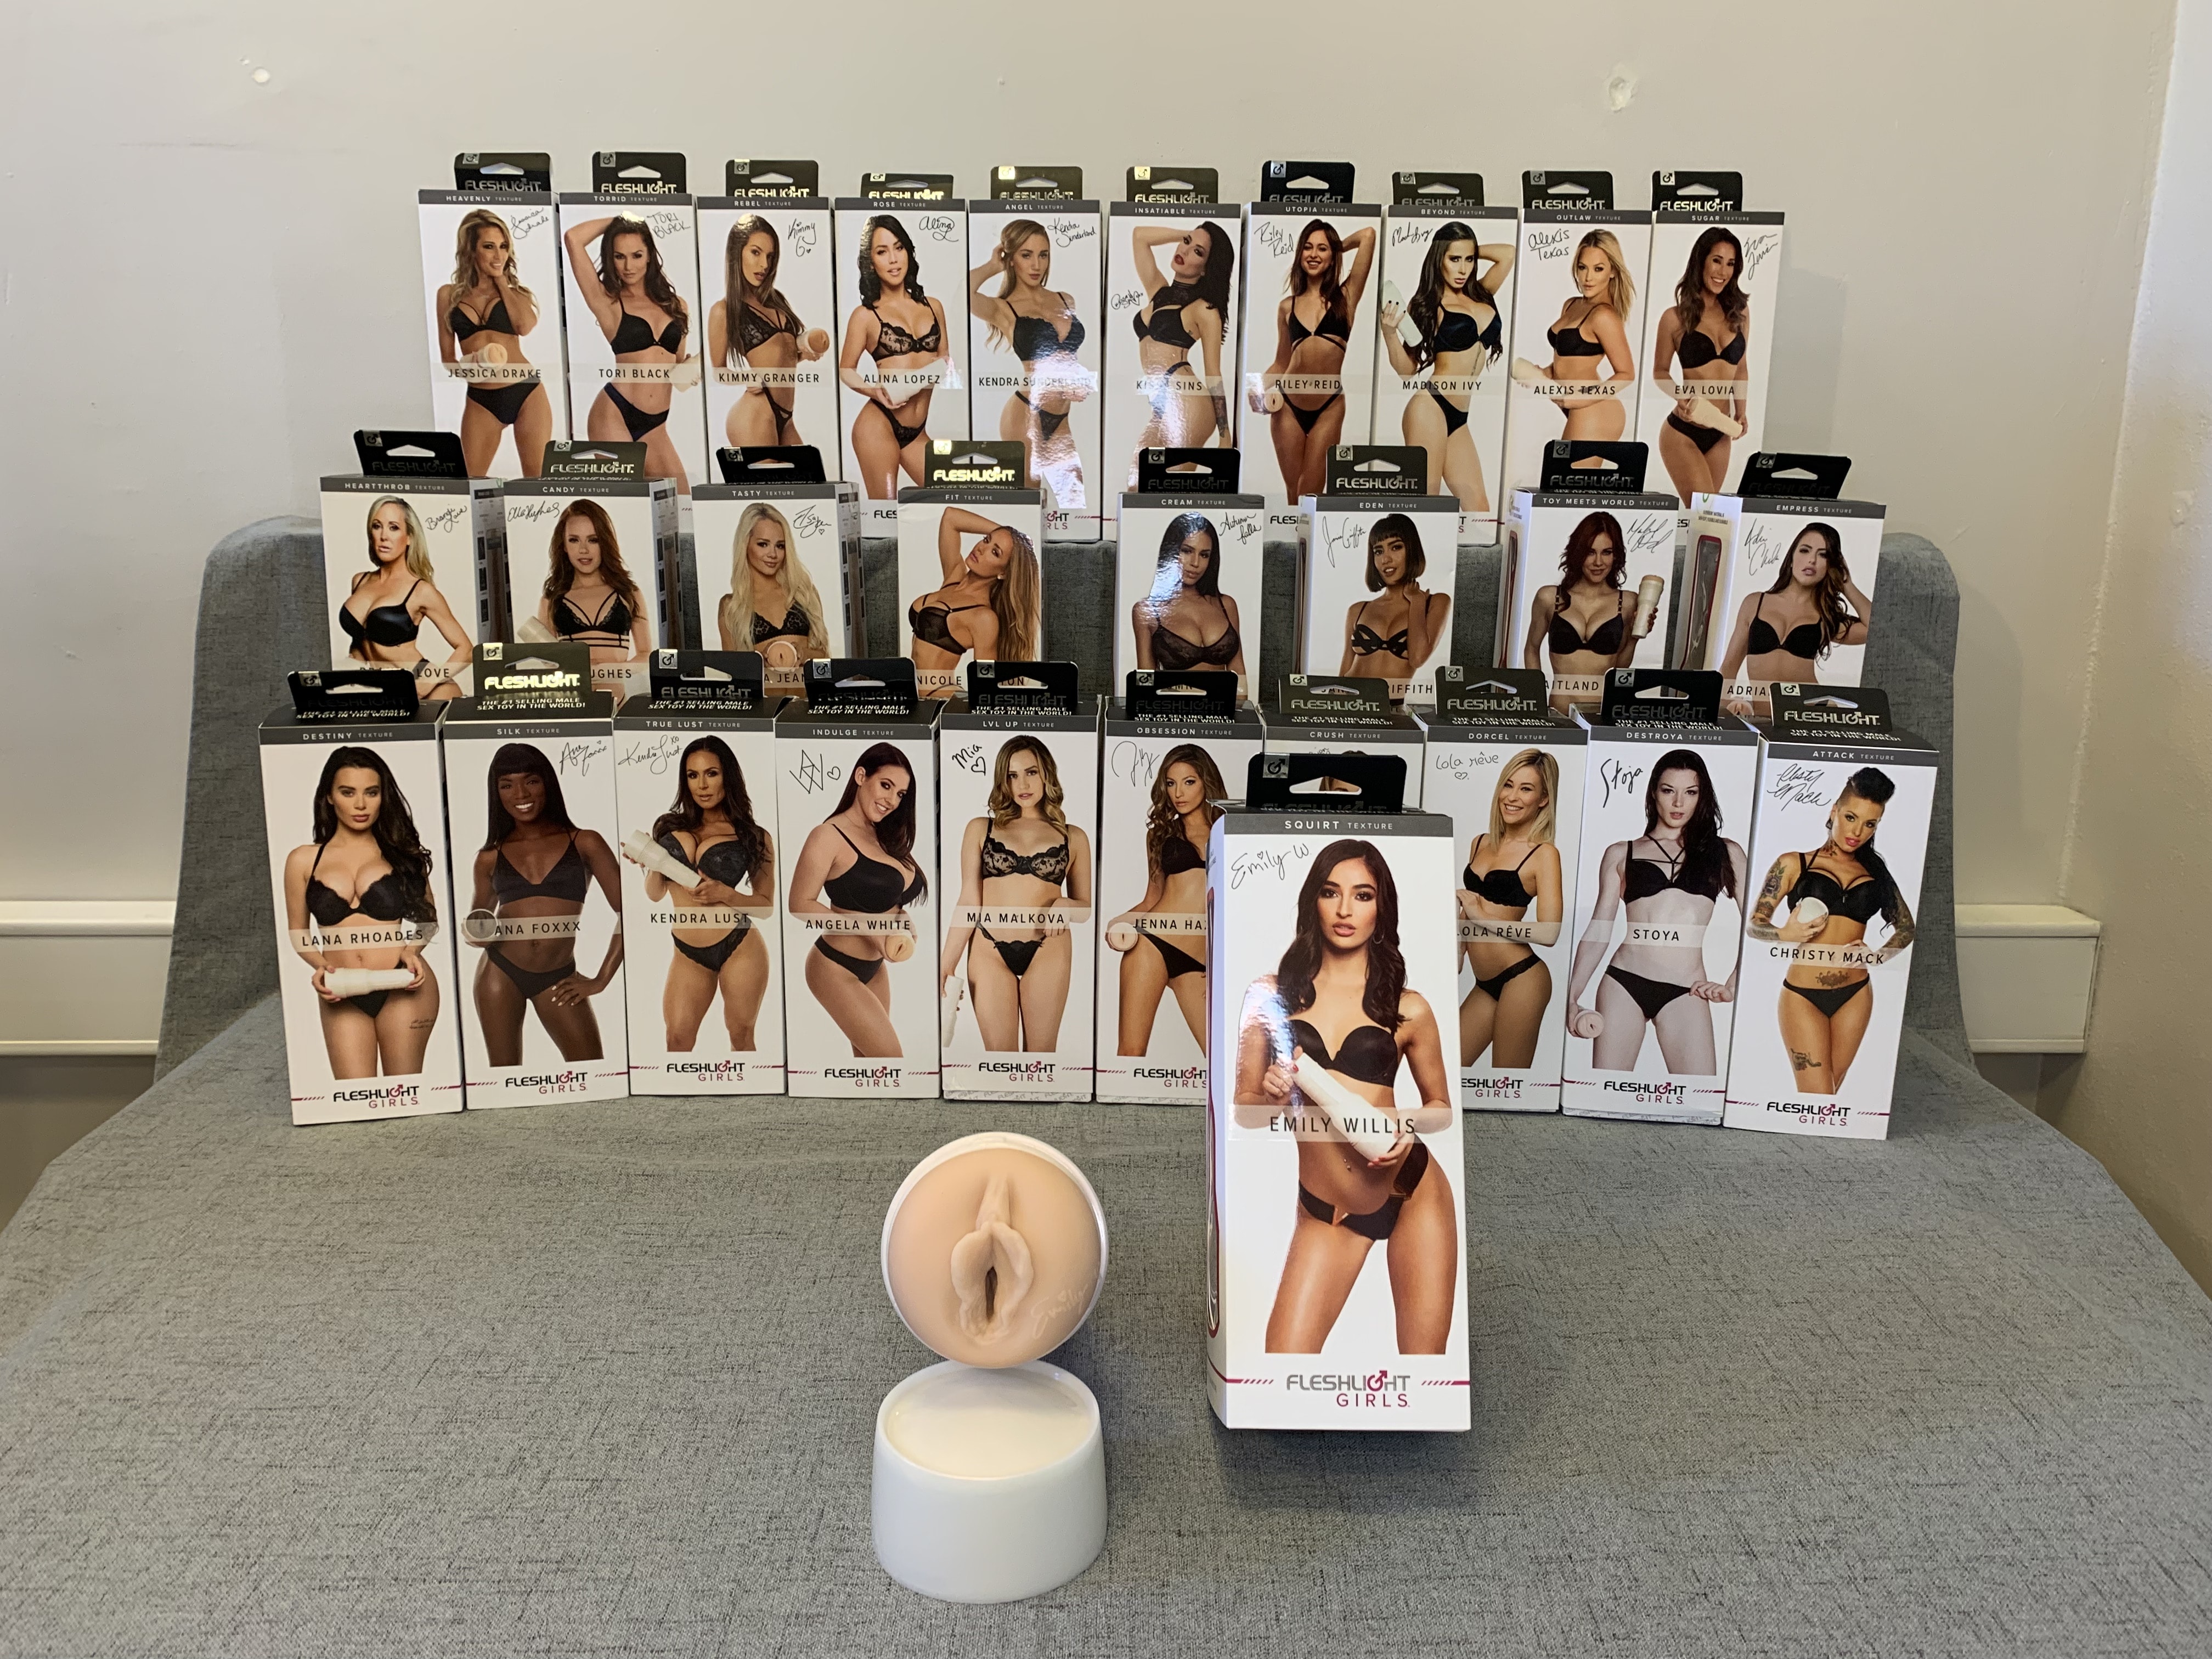 My Personal Experiences with Emily Willis Fleshlight Squirt